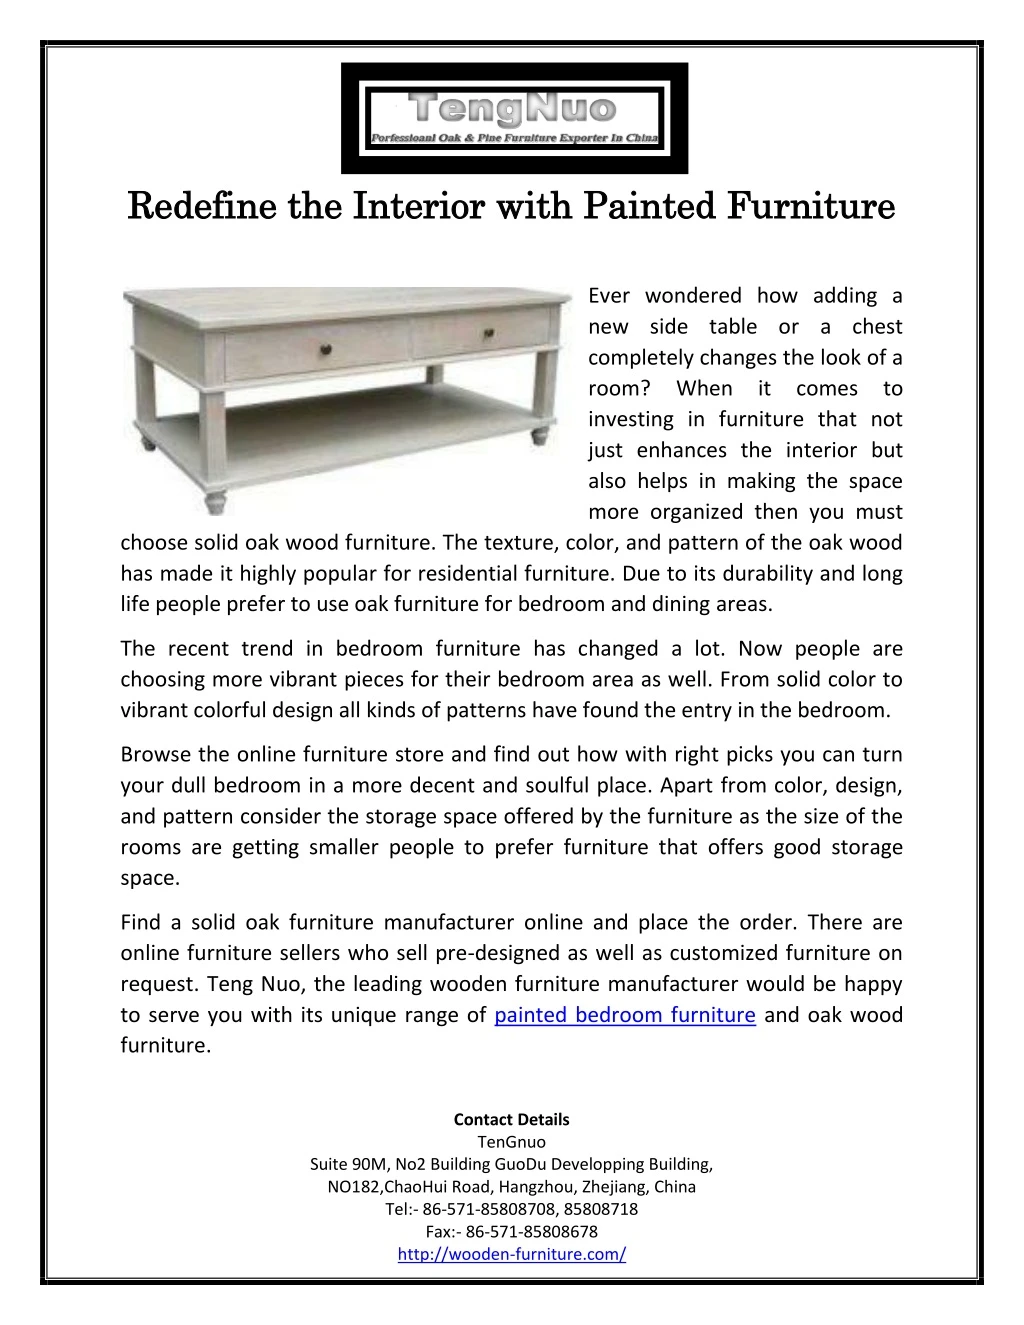 redefine the interior with painted furniture